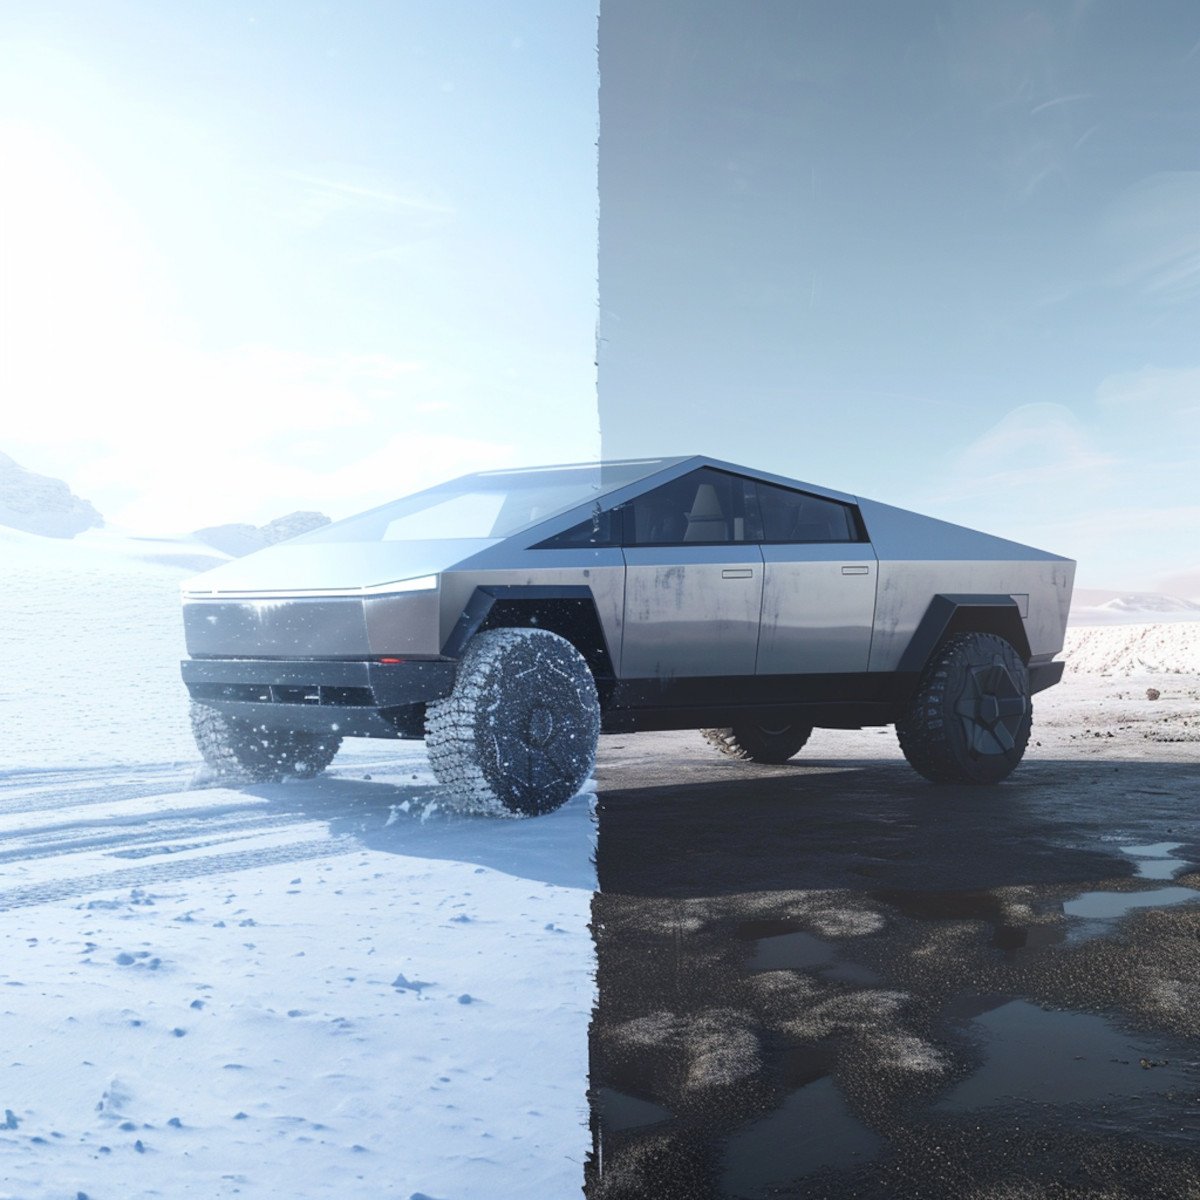 cybertruck-is-shown-with-a-split-environment-background-on-one-side-sunny-weather-and-on-the-other-a-winter-blizzard